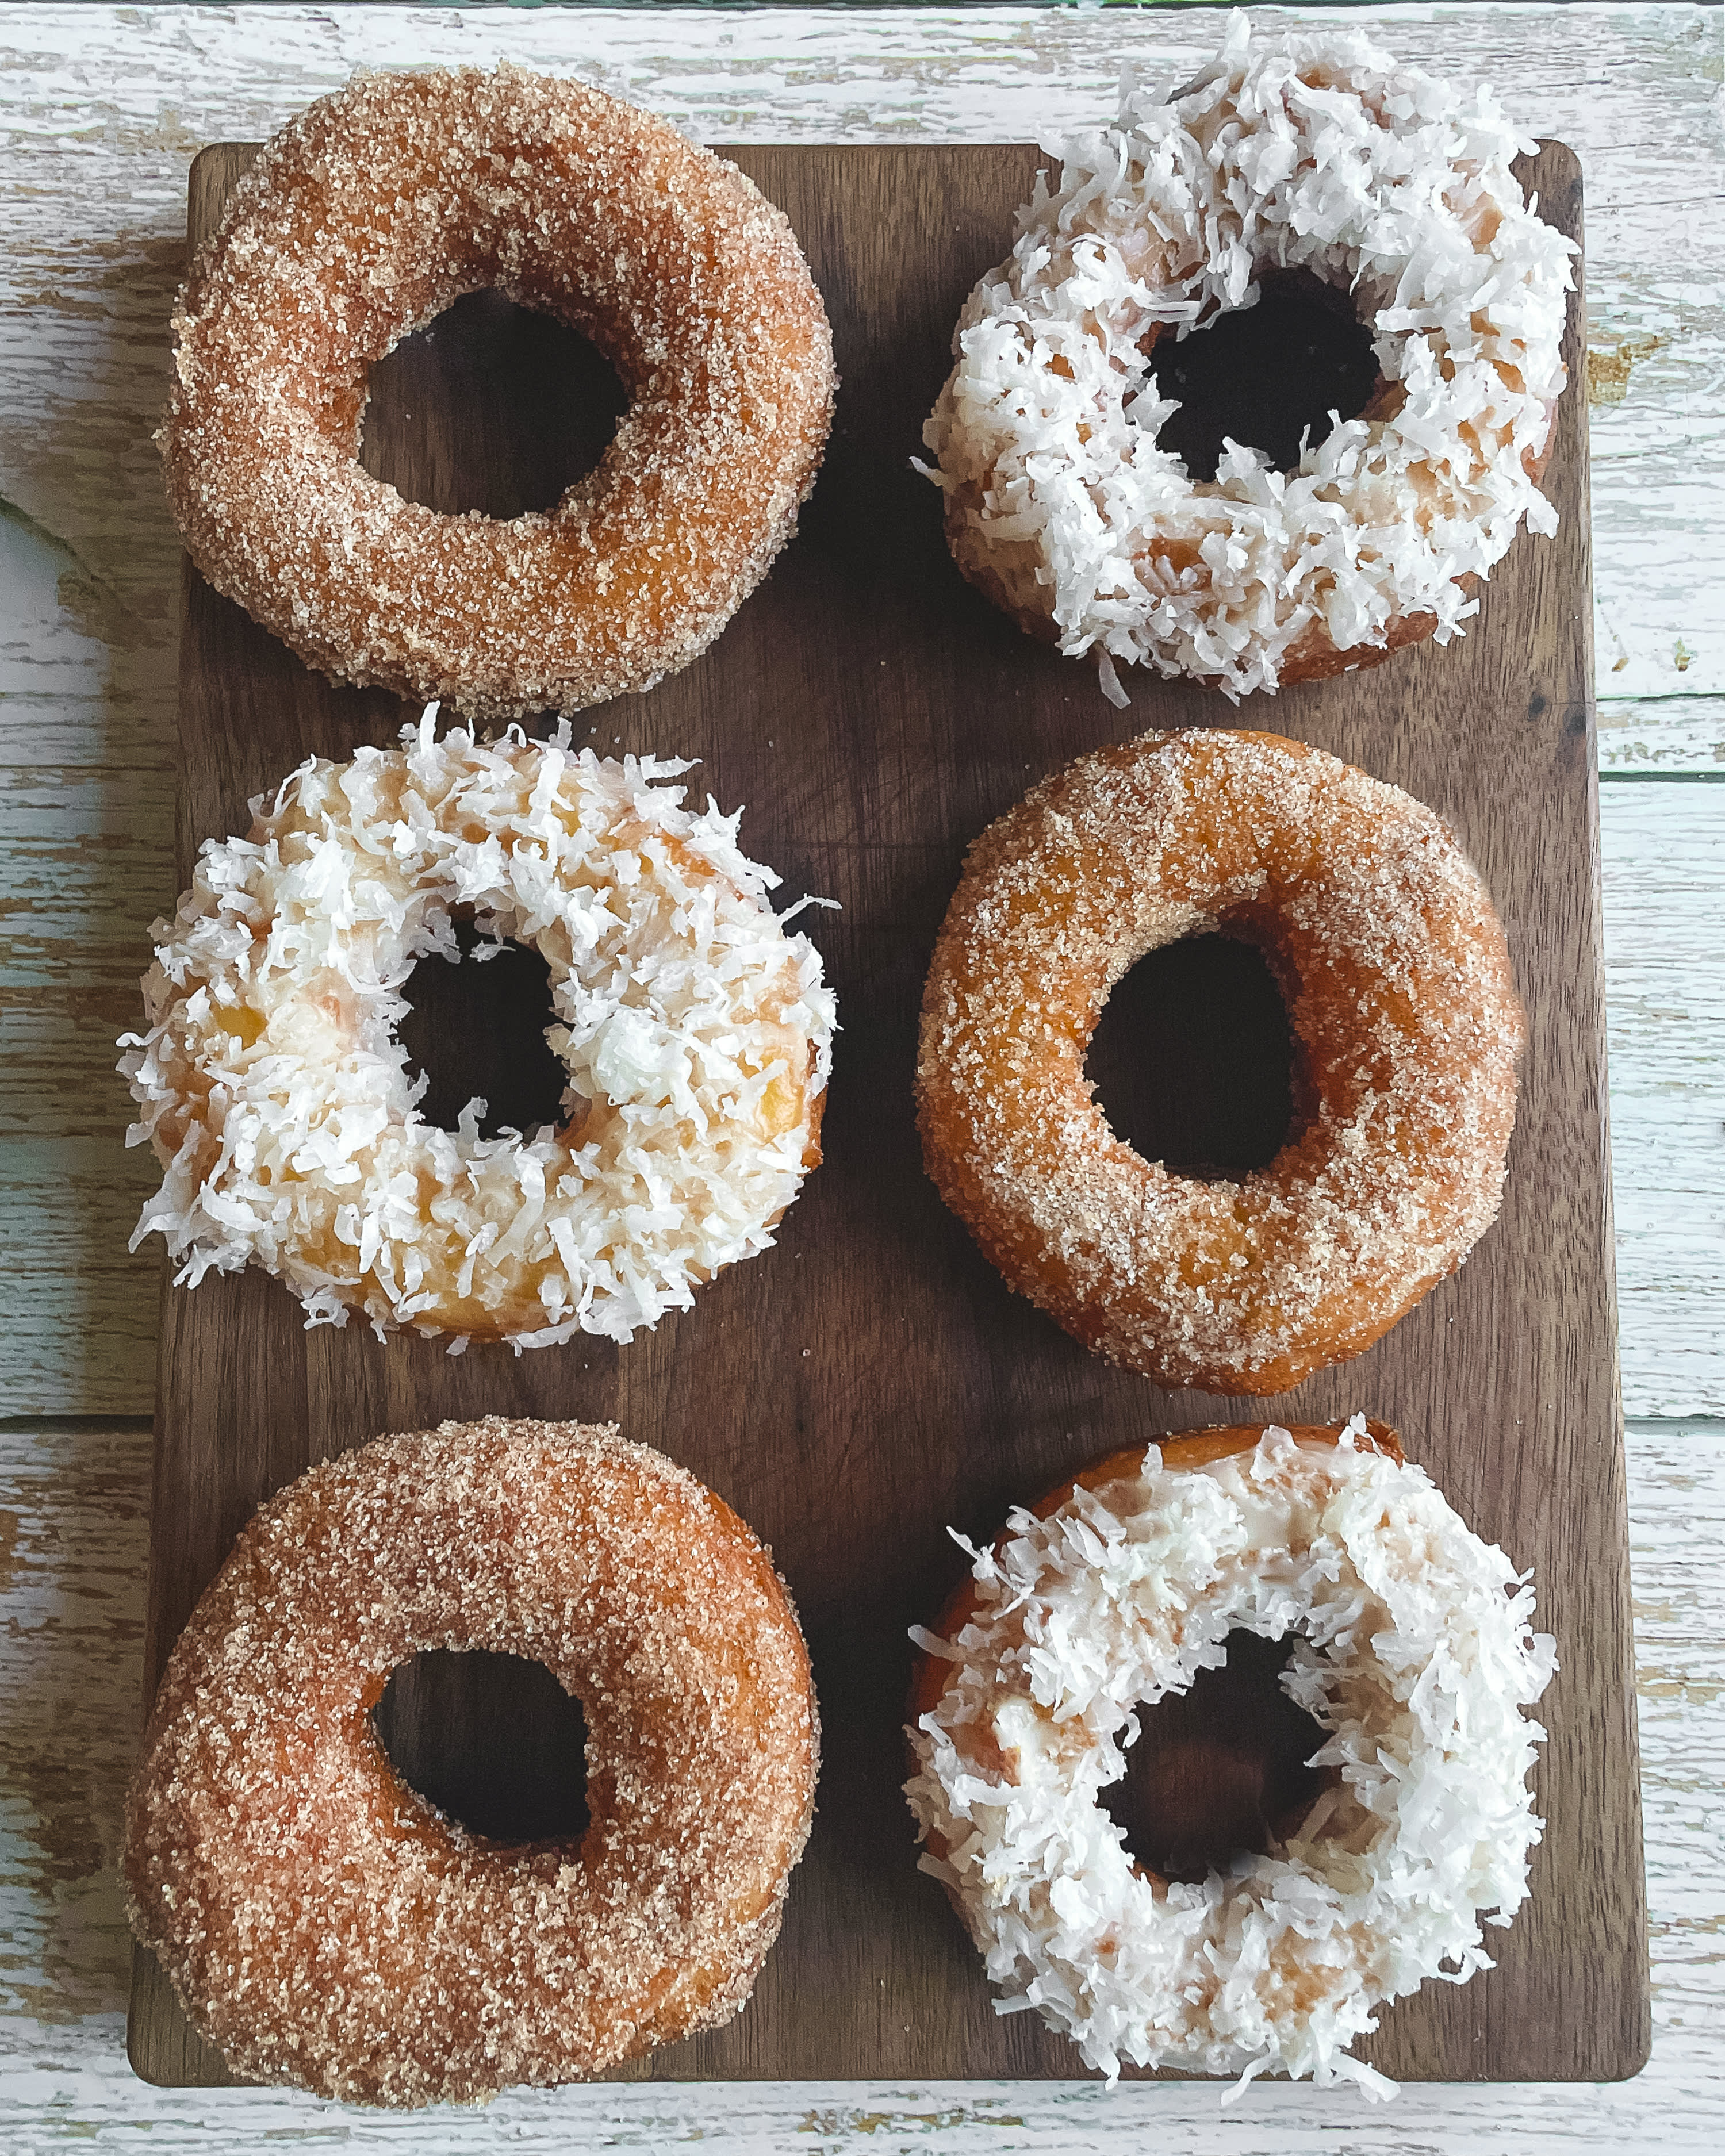 Vegan Donuts Recipe (Easy, With Yeast) | The Kitchn